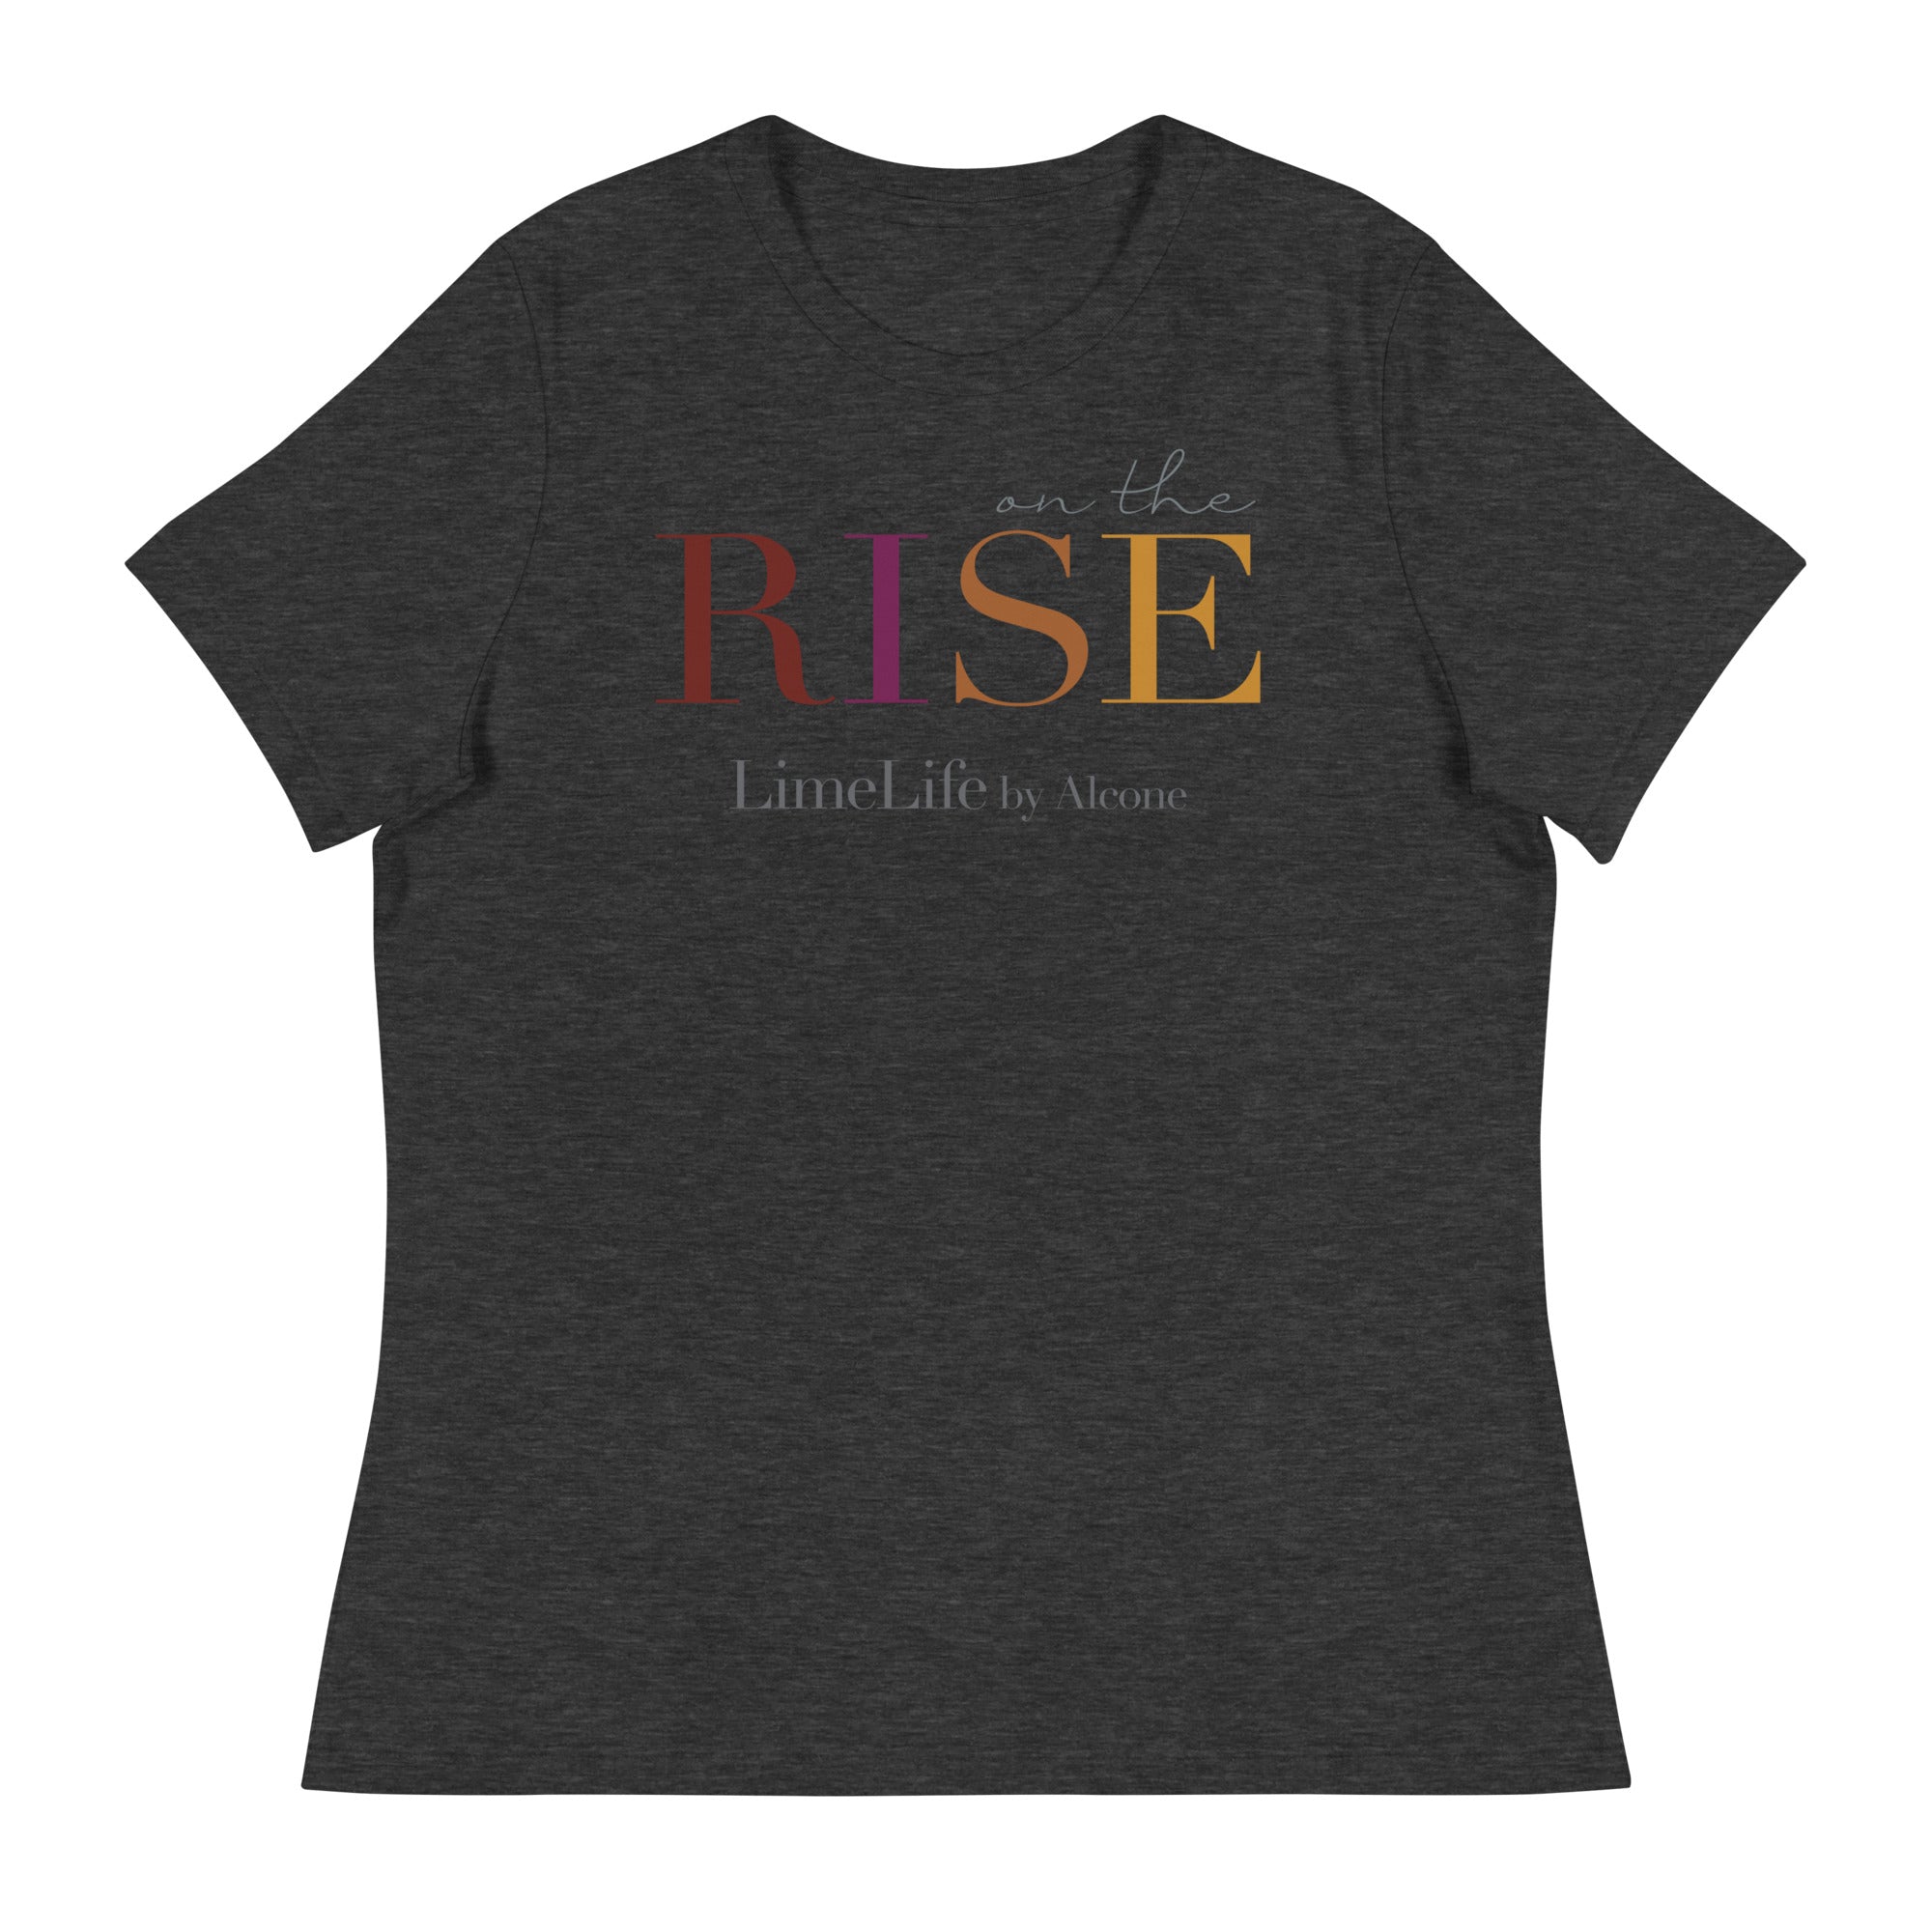 On the Rise - Women's Relaxed T-Shirt in Black, Dark Grey Heather and White